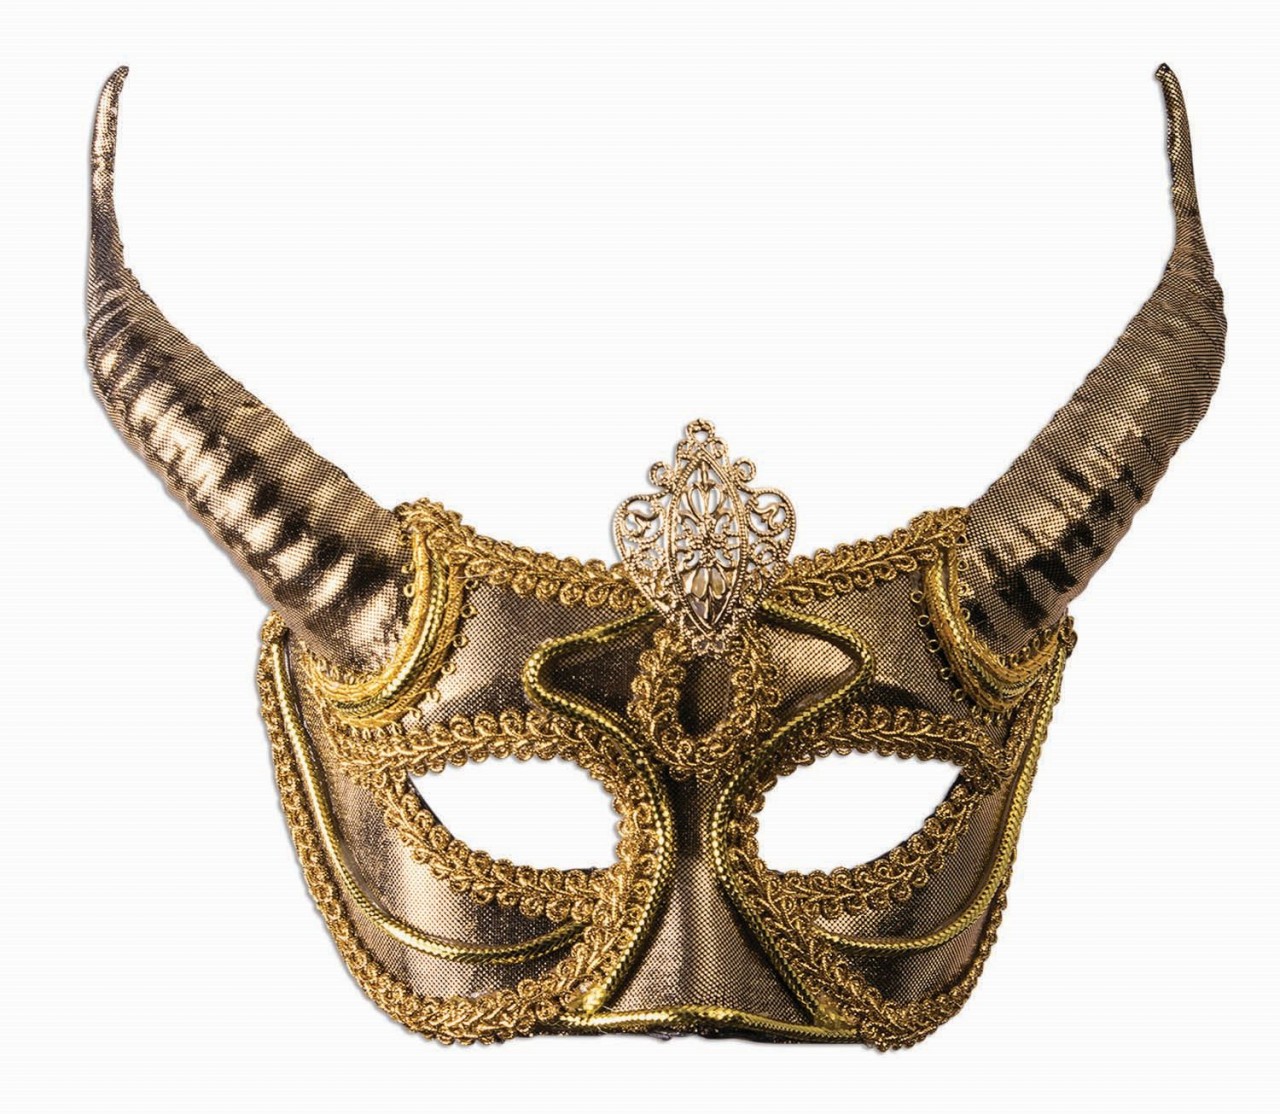 Gold Masquerade Mask with Horns